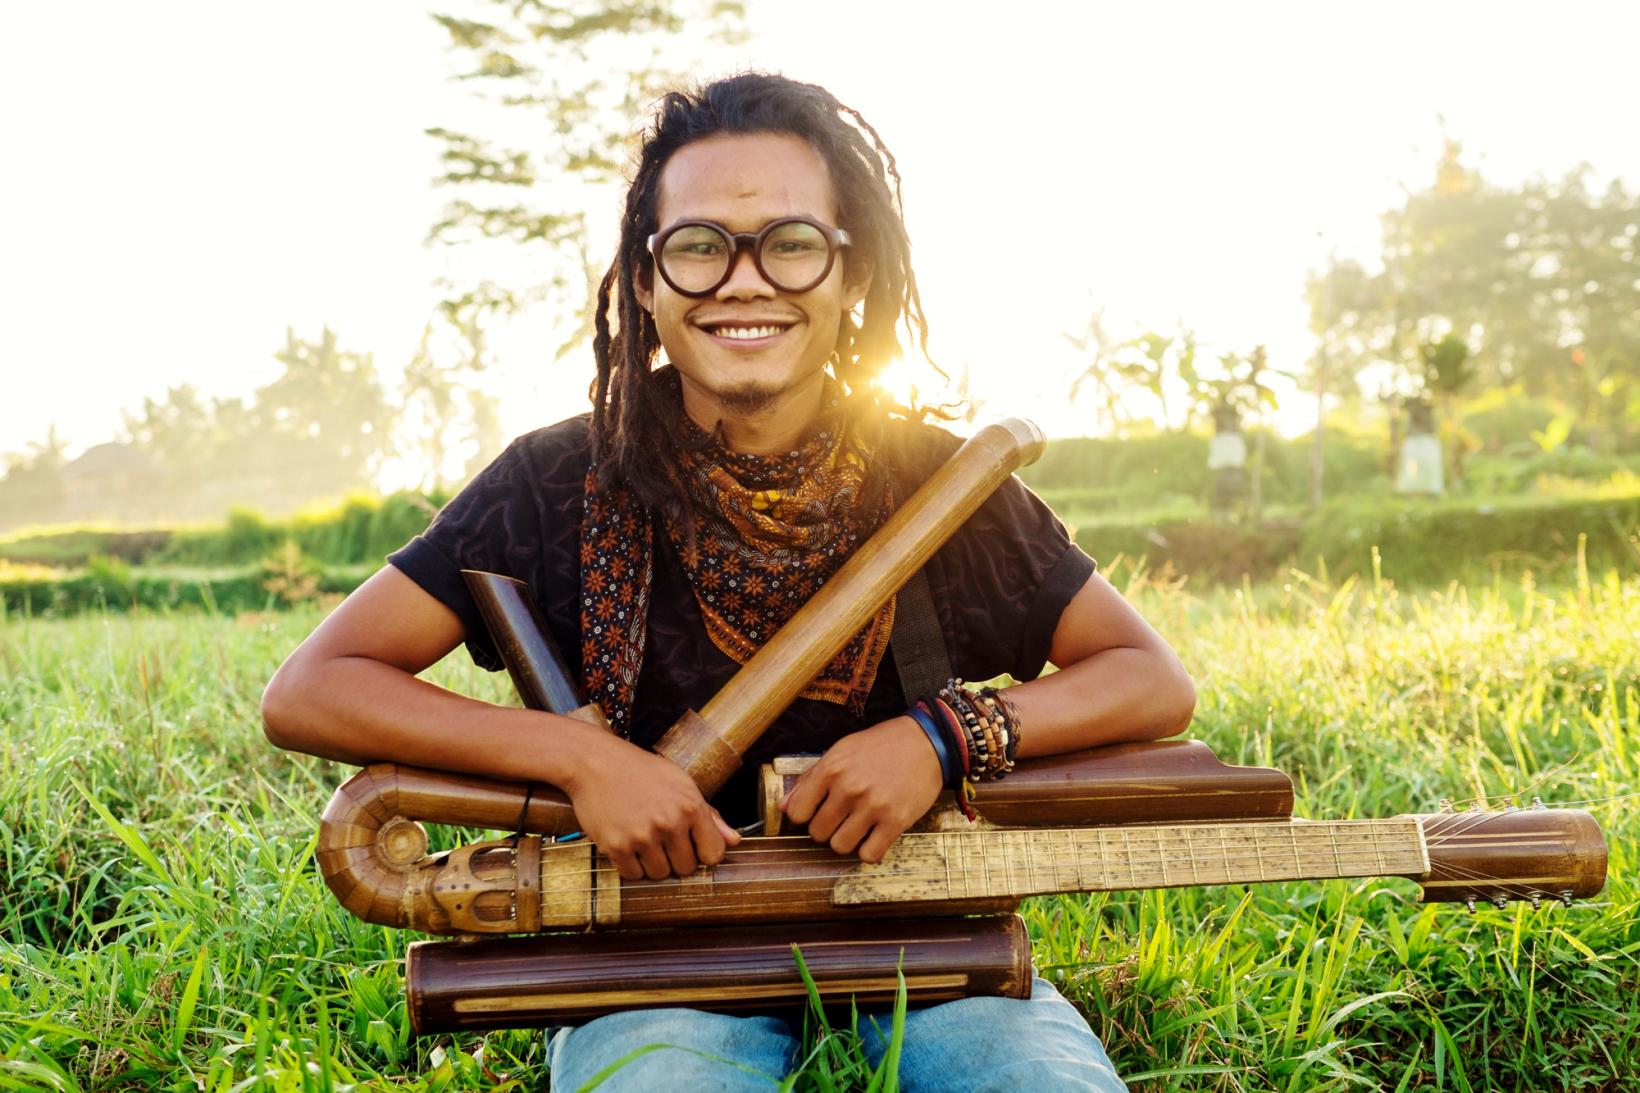 Ever thought of building your own musical instruments? Meet the man whose bamboo tunes rock!